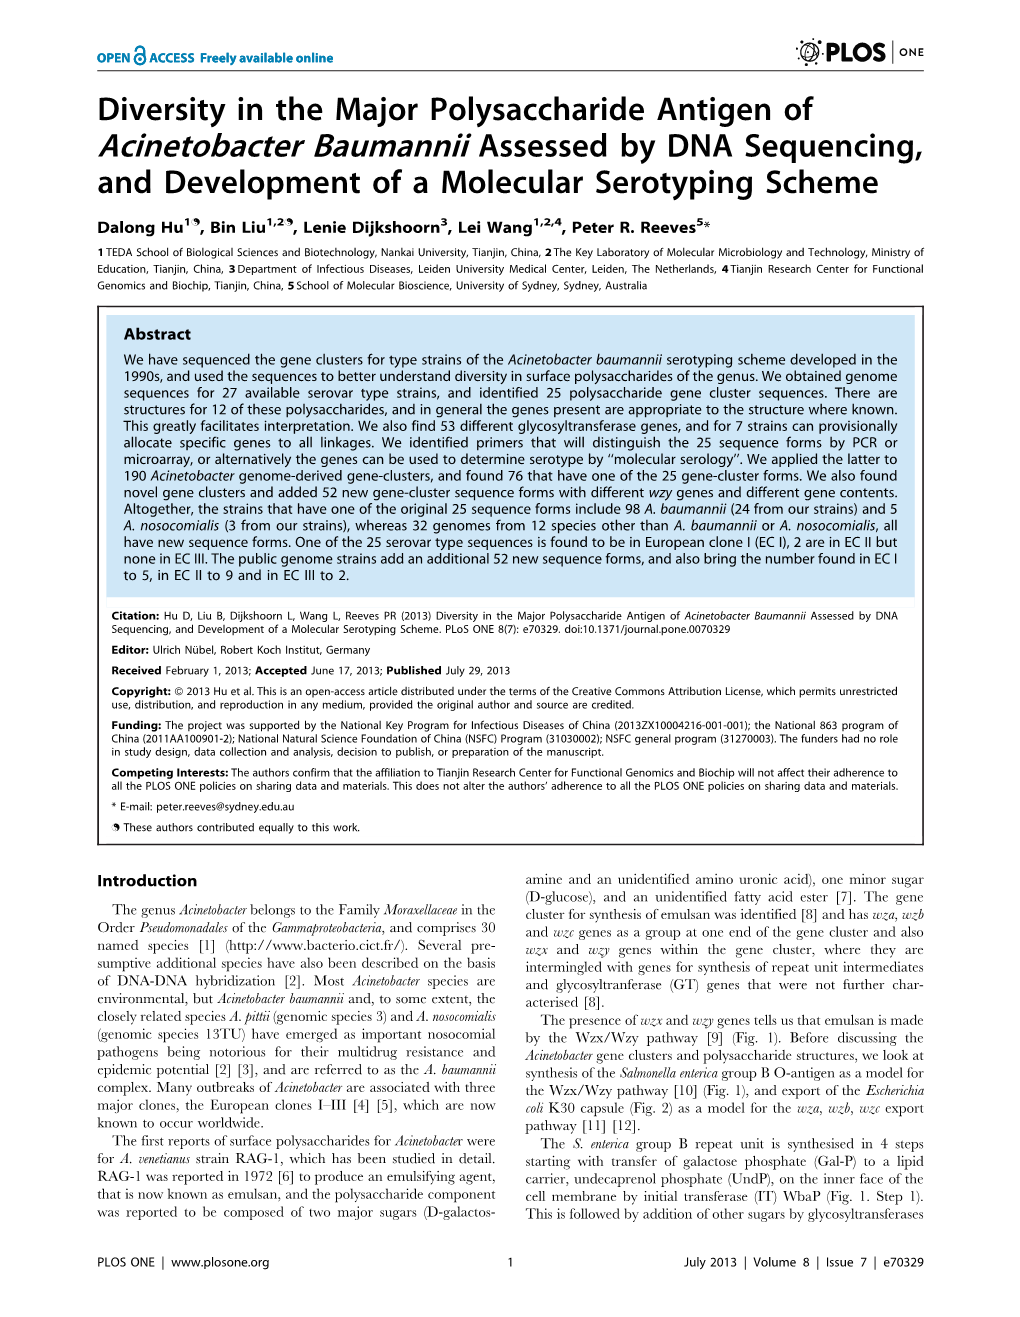 Diversity in the Major Polysaccharide Antigen of Acinetobacter Baumannii Assessed by DNA Sequencing, and Development of a Molecular Serotyping Scheme